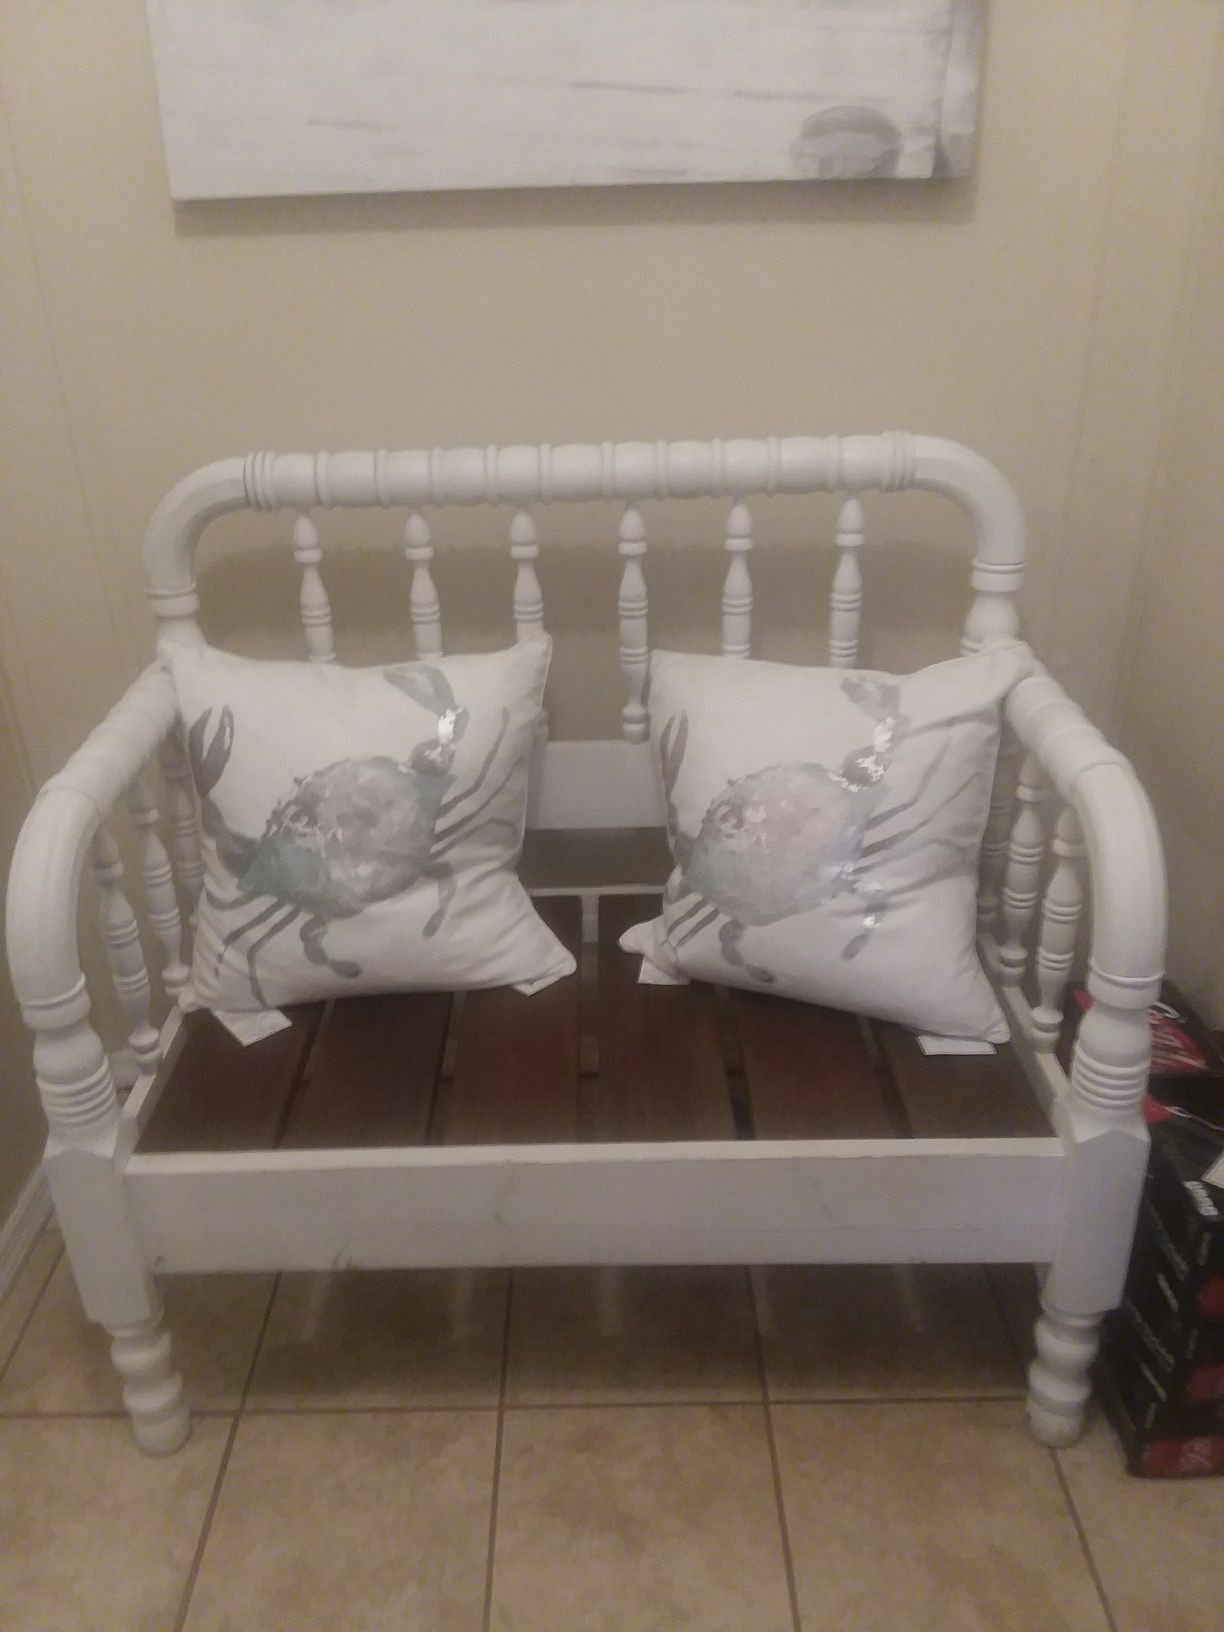 Heavy duty custom bench from Vintage Authentic Jenny Lind bed